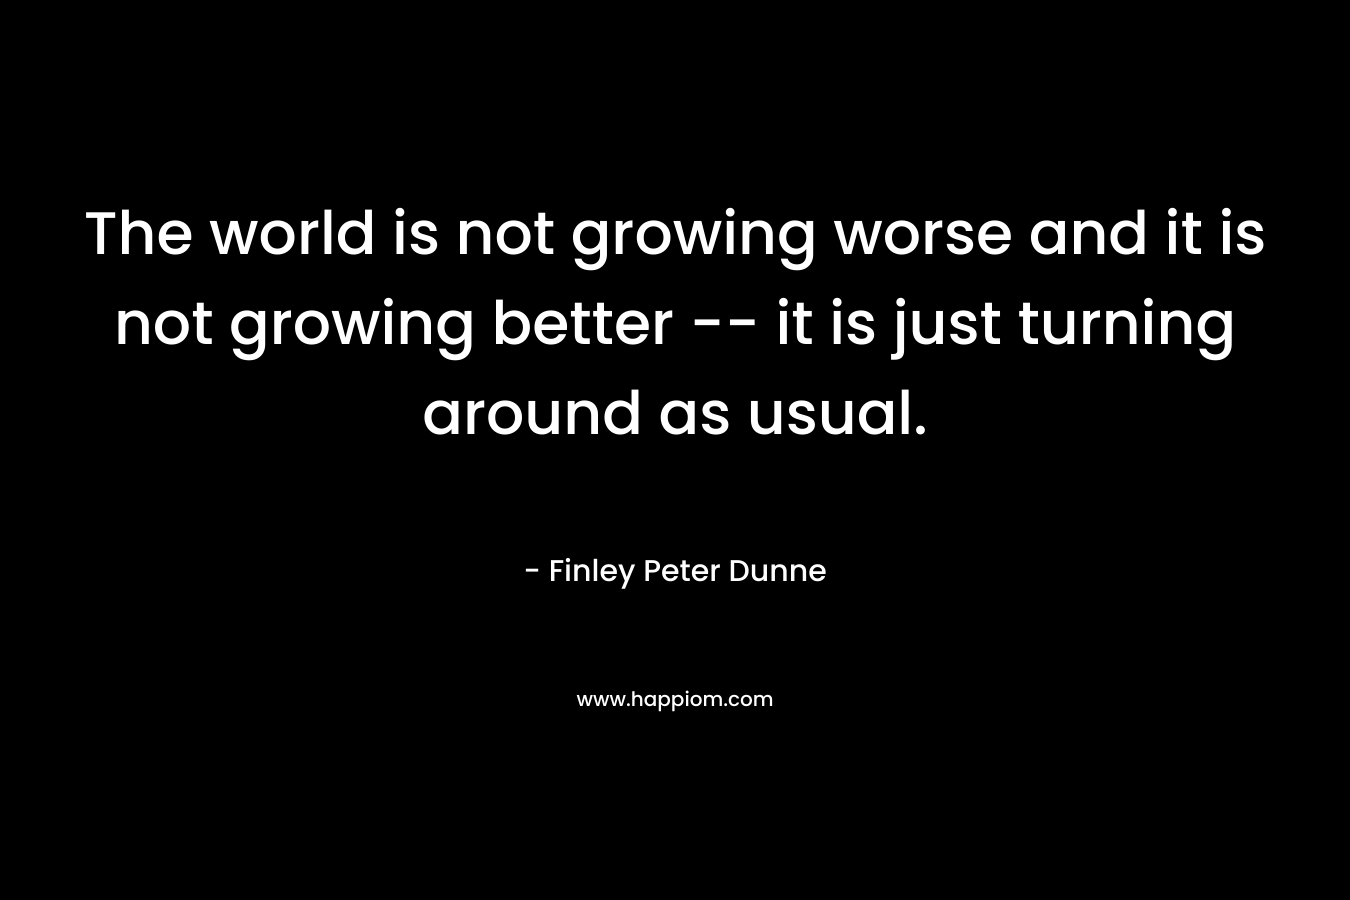 The world is not growing worse and it is not growing better -- it is just turning around as usual.